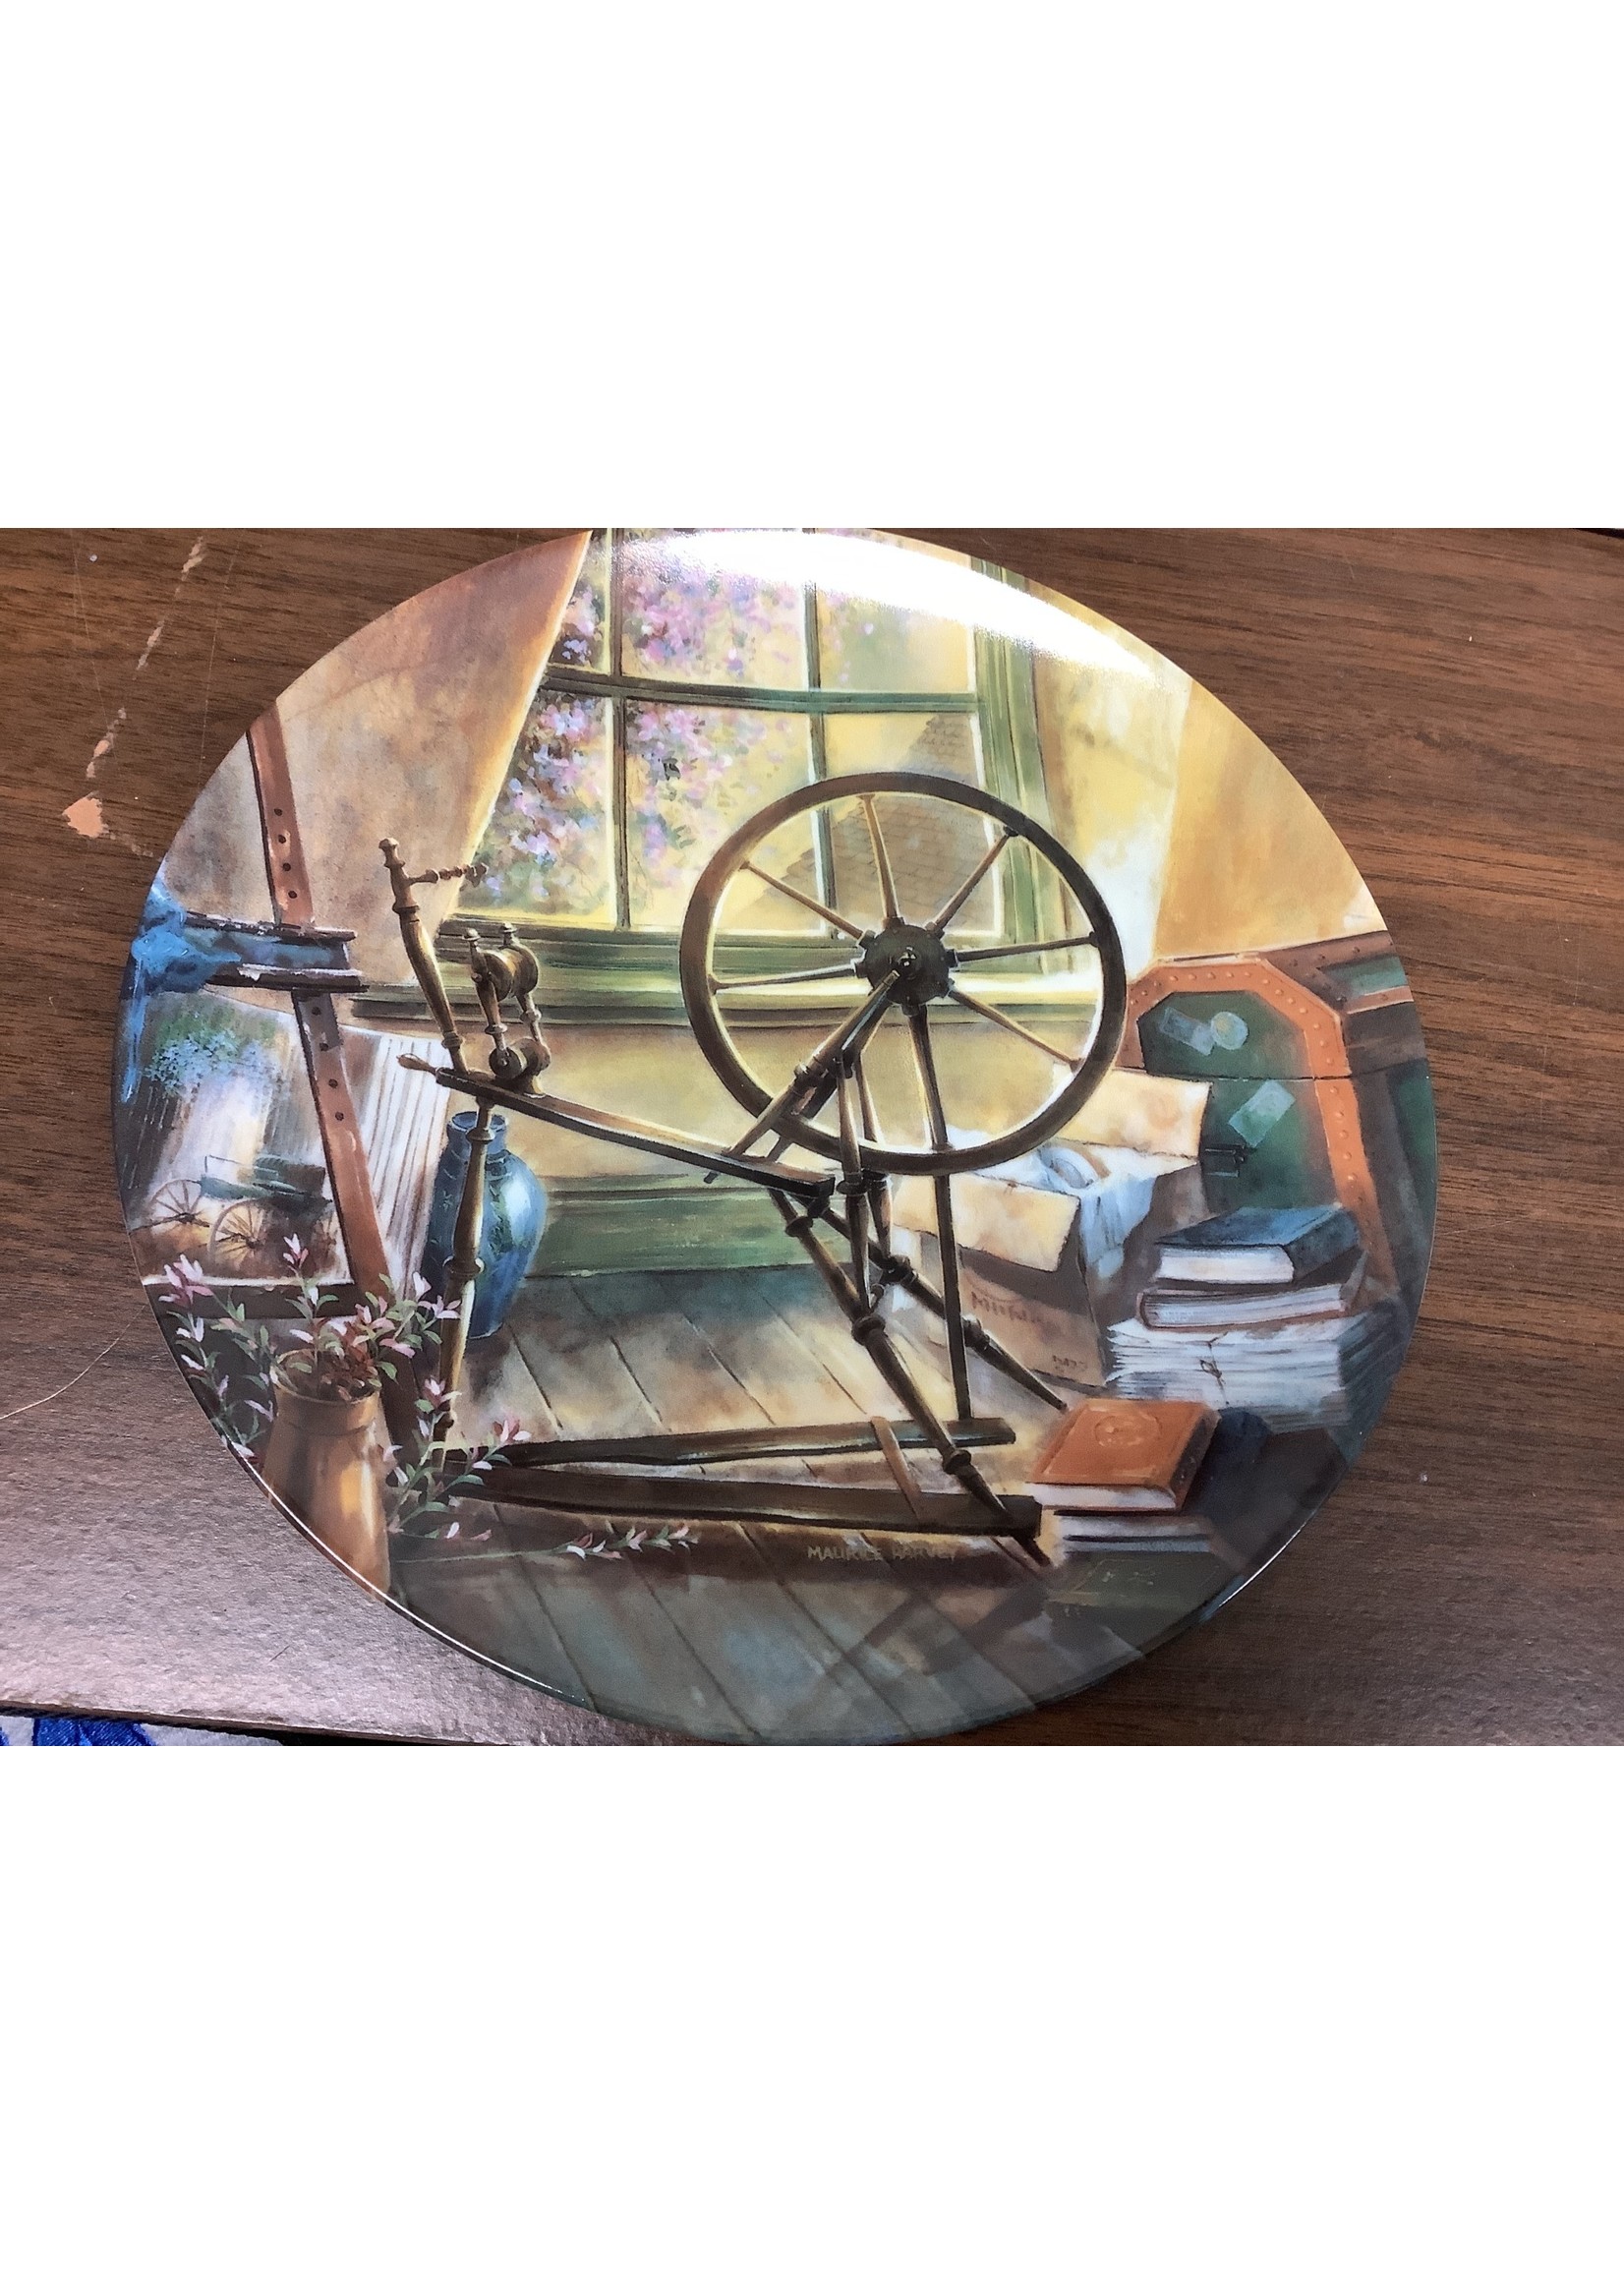 The Bradford Exchange Collectors Plate (1990) “The Antique Spinning Wheel” Bradex-Nr. 84-G20-18.8